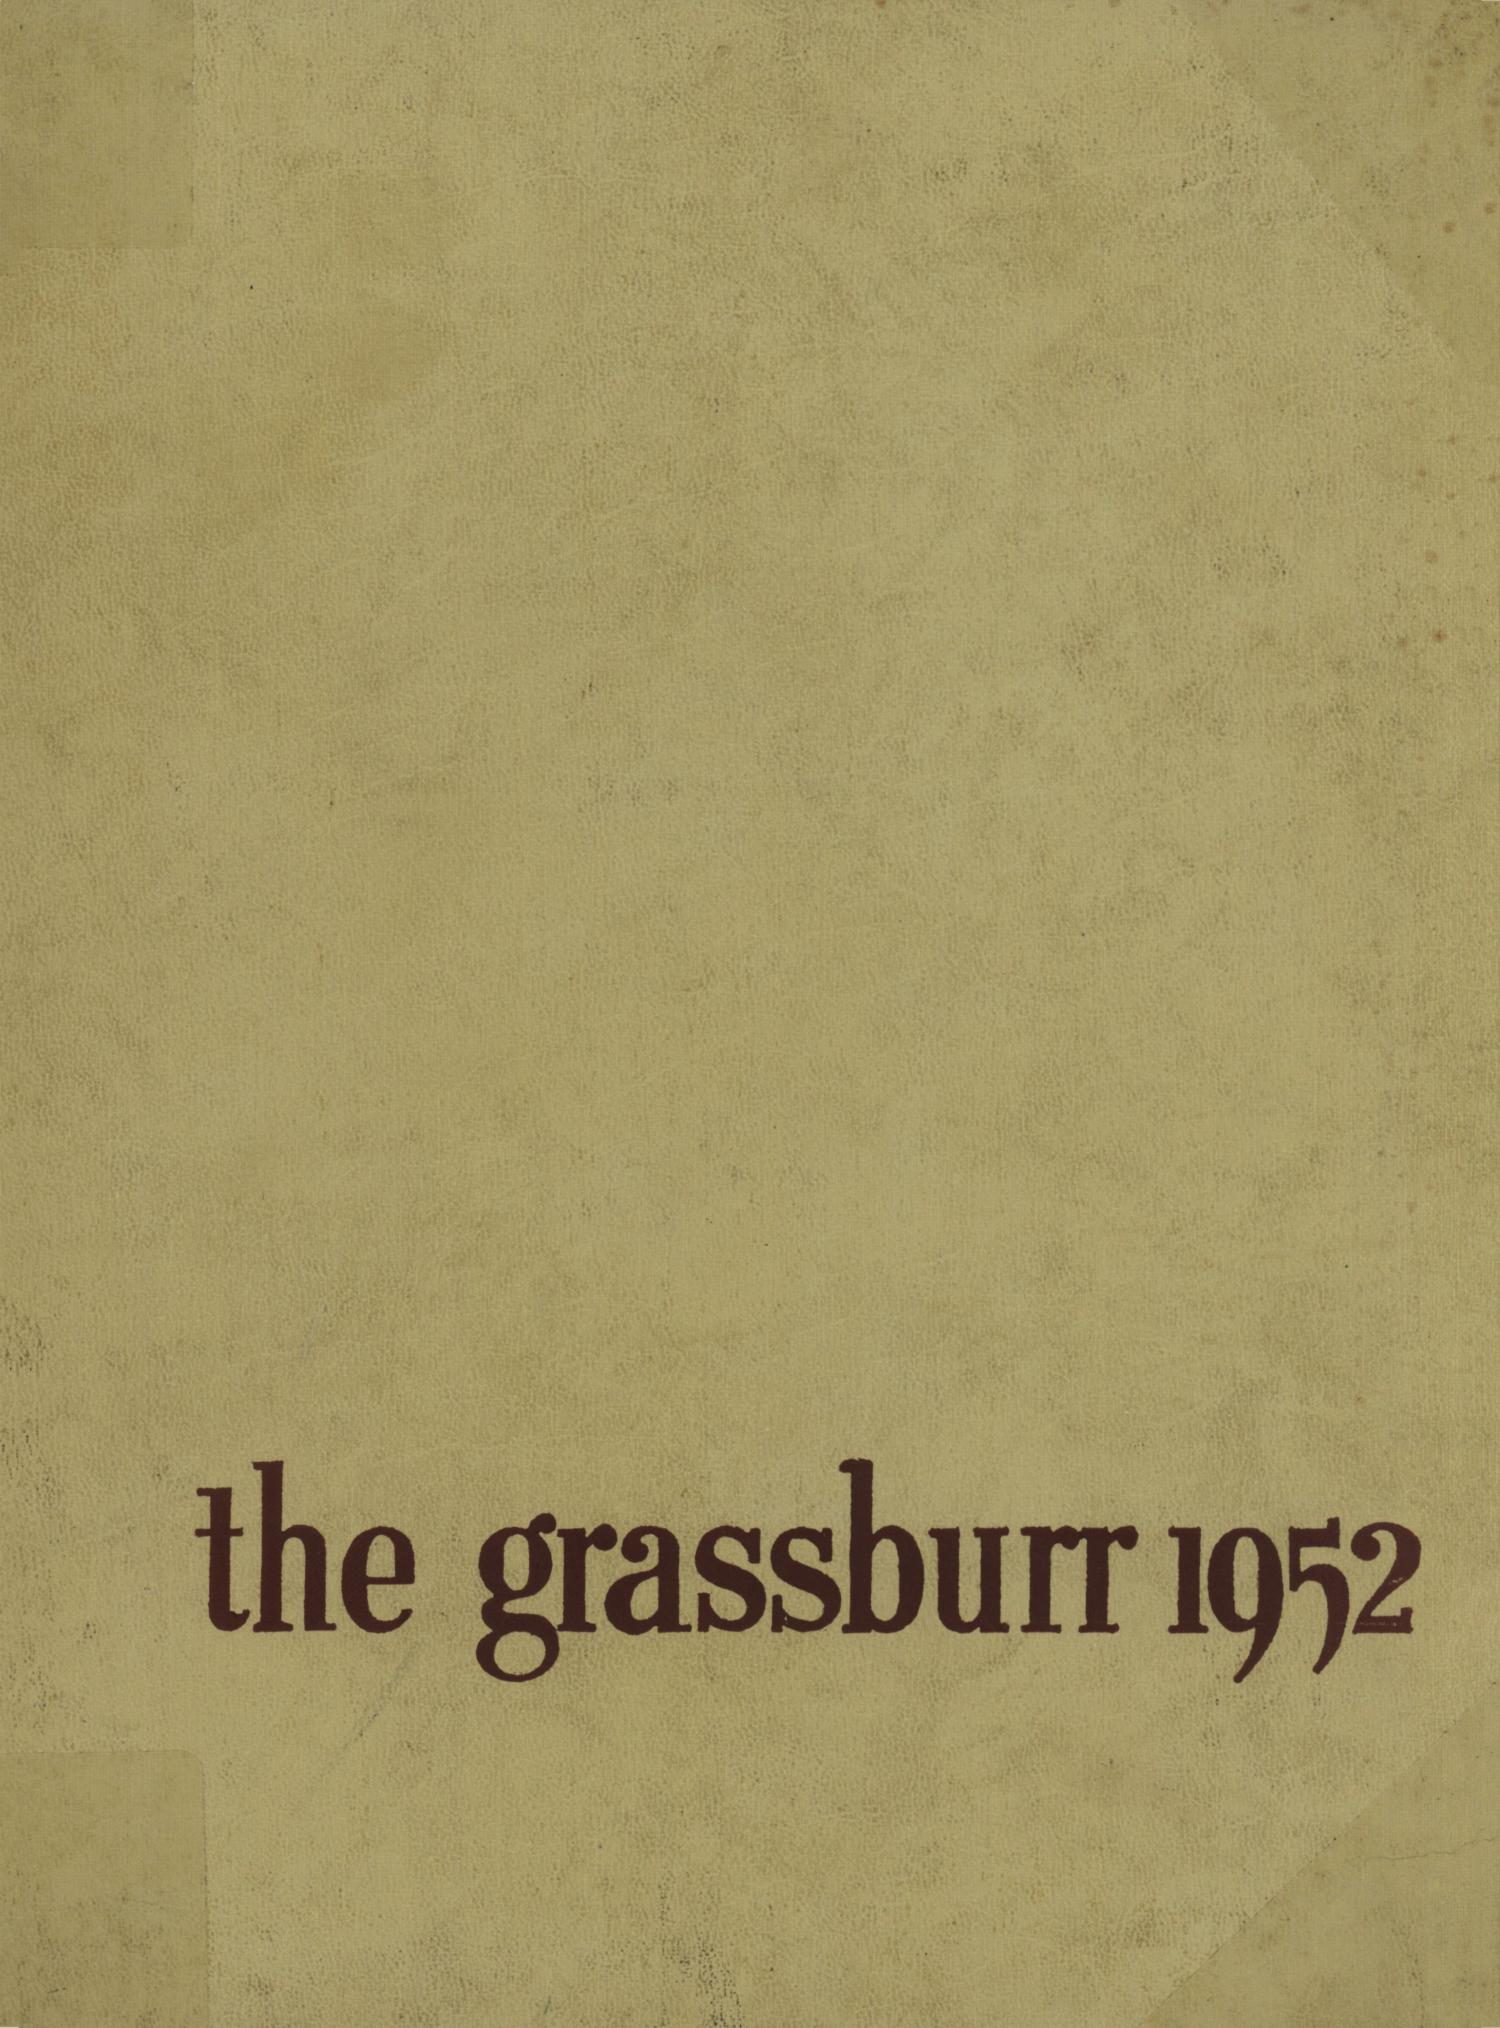 The Grassburr, Yearbook of Tarleton State College, 1952
                                                
                                                    Front Cover
                                                